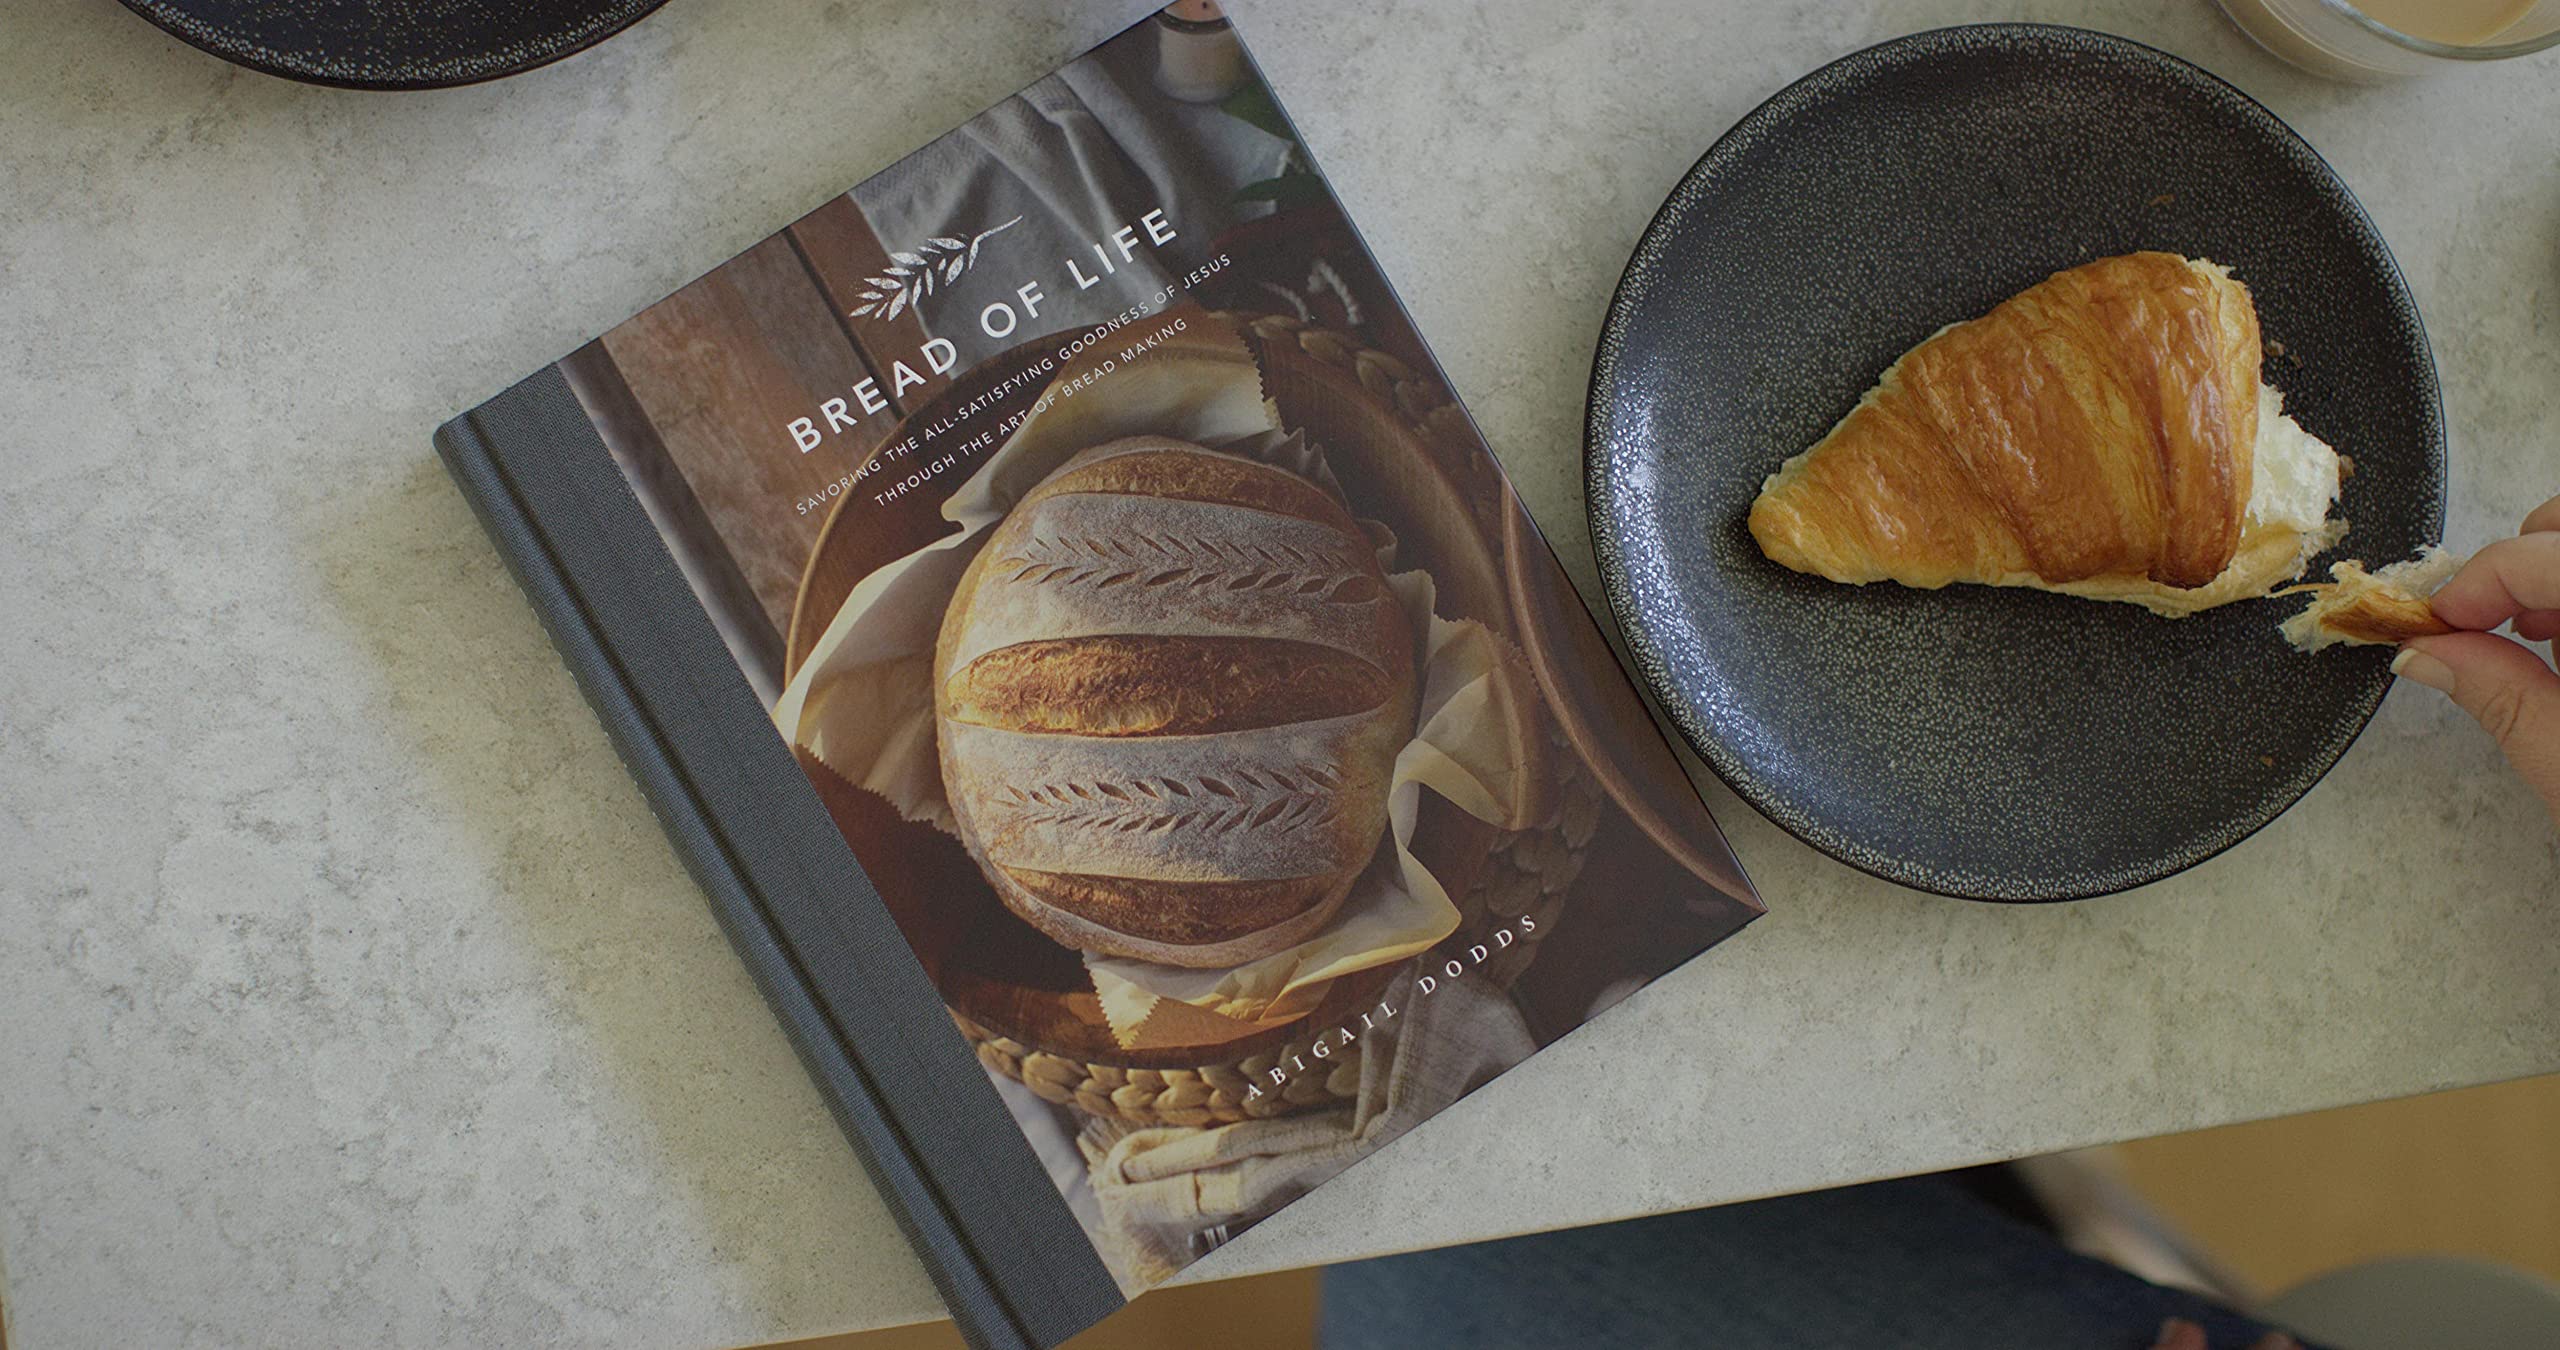 Bread of Life: Savoring the All-Satisfying Goodness of Jesus through the Art of Bread Making